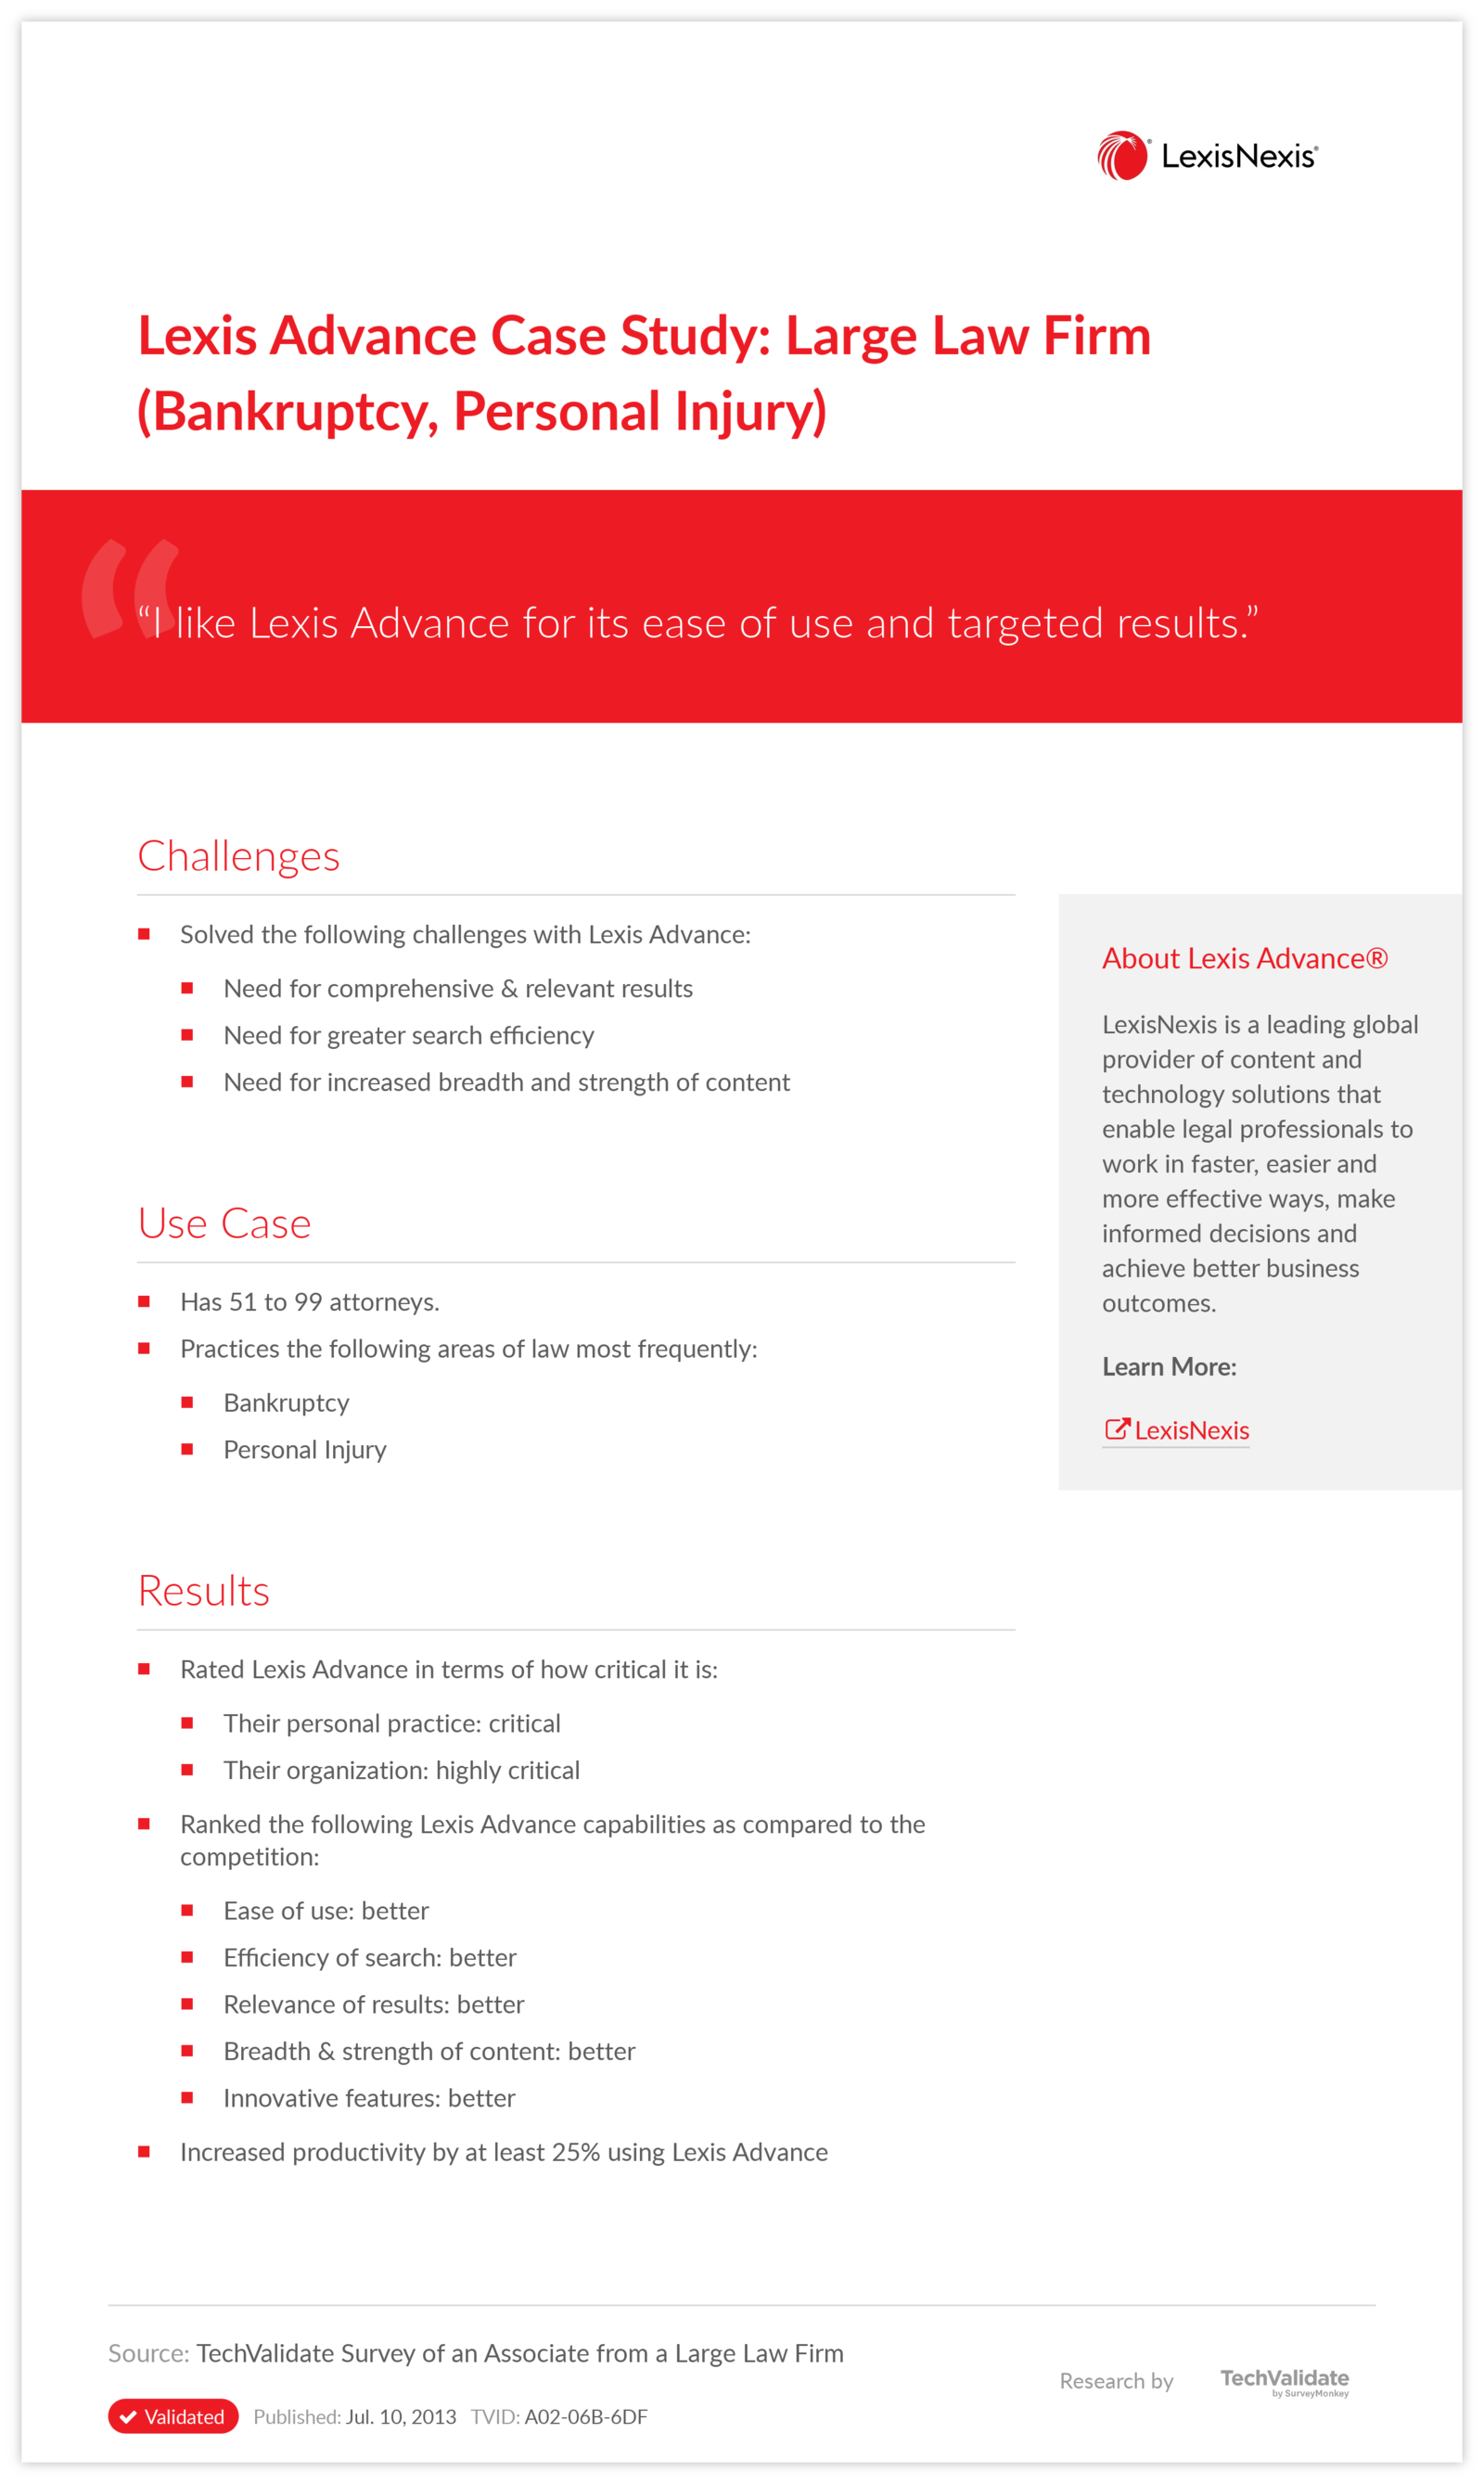 Lexis Advance Case Study: Large Law Firm (Bankruptcy, Personal Injury)